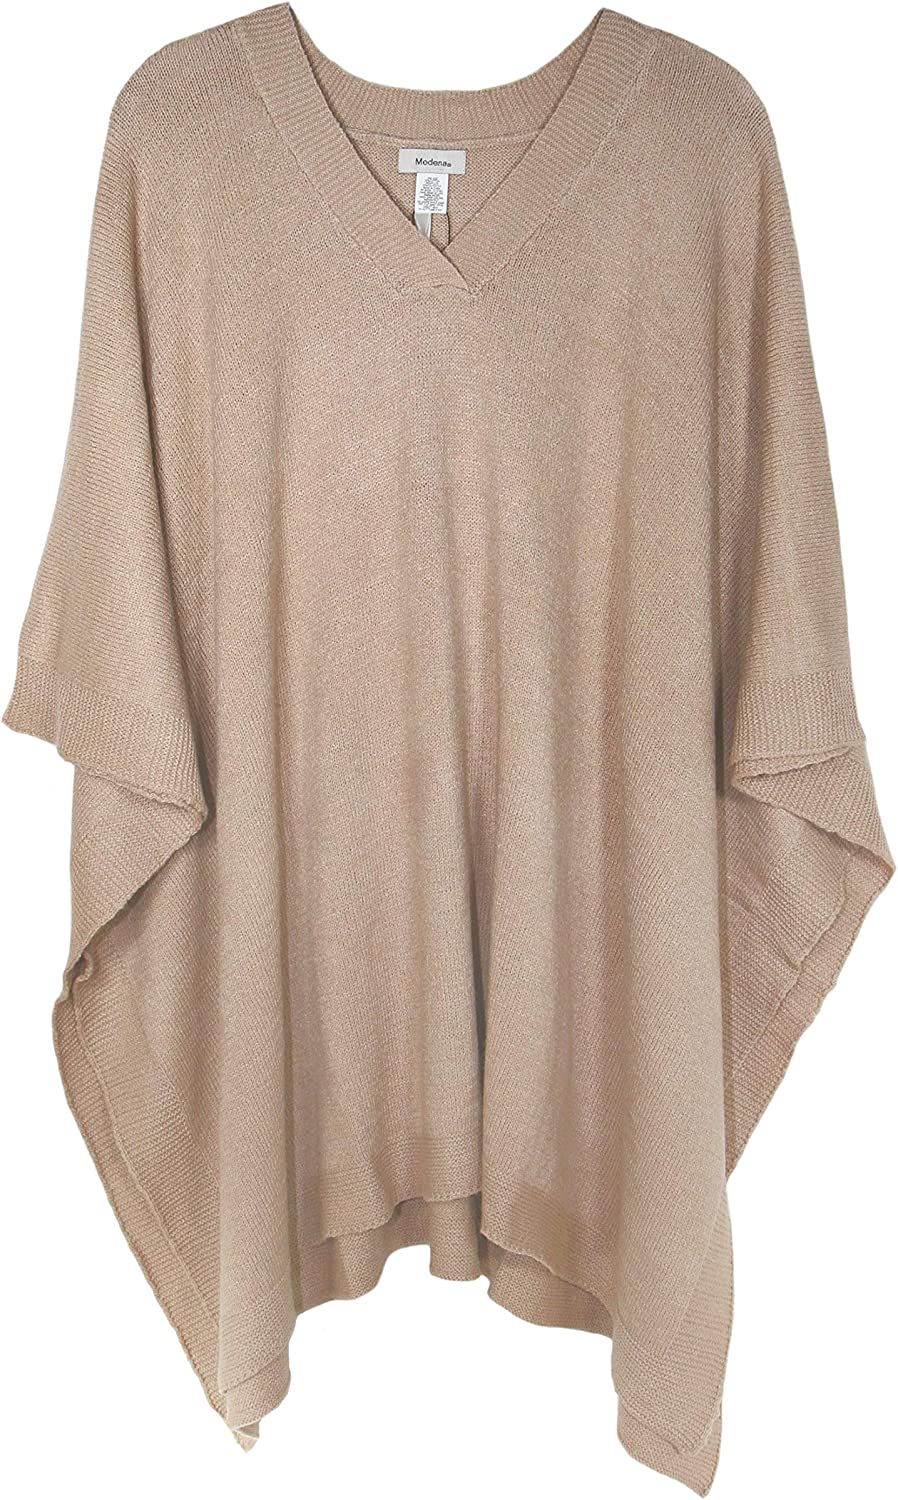 Modena Women's ExtraSoft Fine Knit Pullover Poncho. Sleeveless, Open Sides. V Neck Easy On and Of... | Amazon (US)